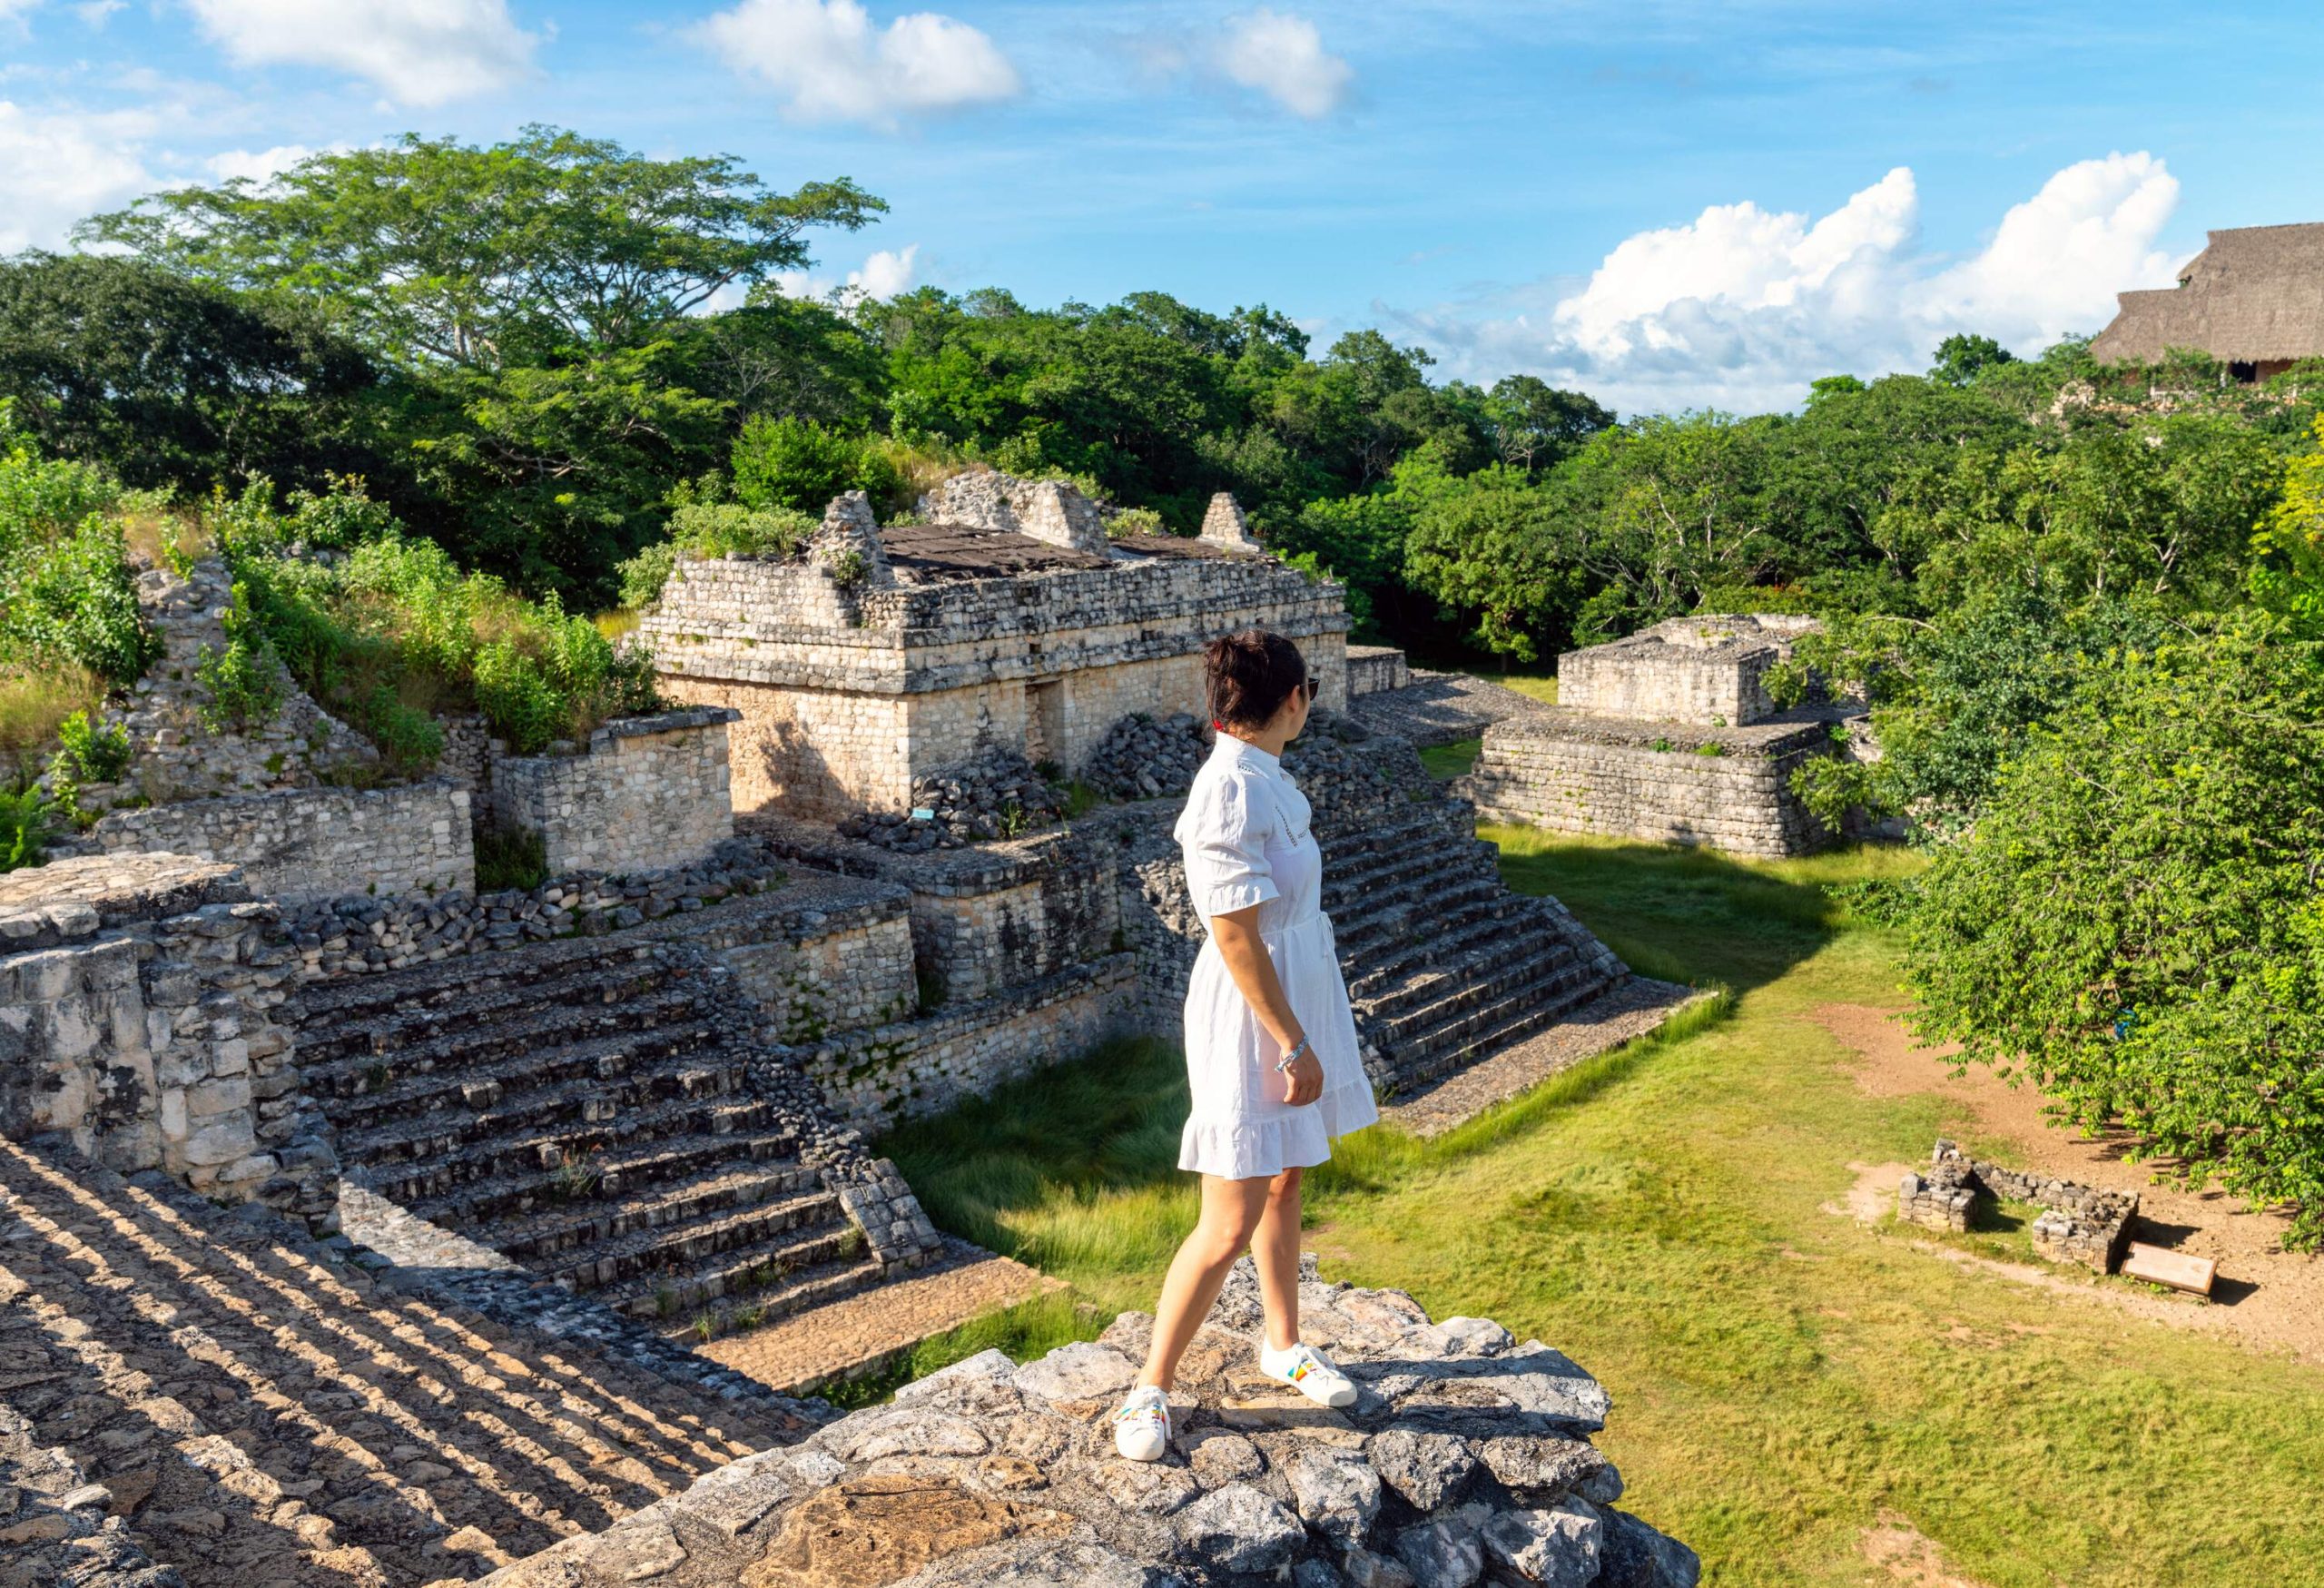 A woman in a white dress stands at the edge of a stone platform admiring the views of Mayan ruins.